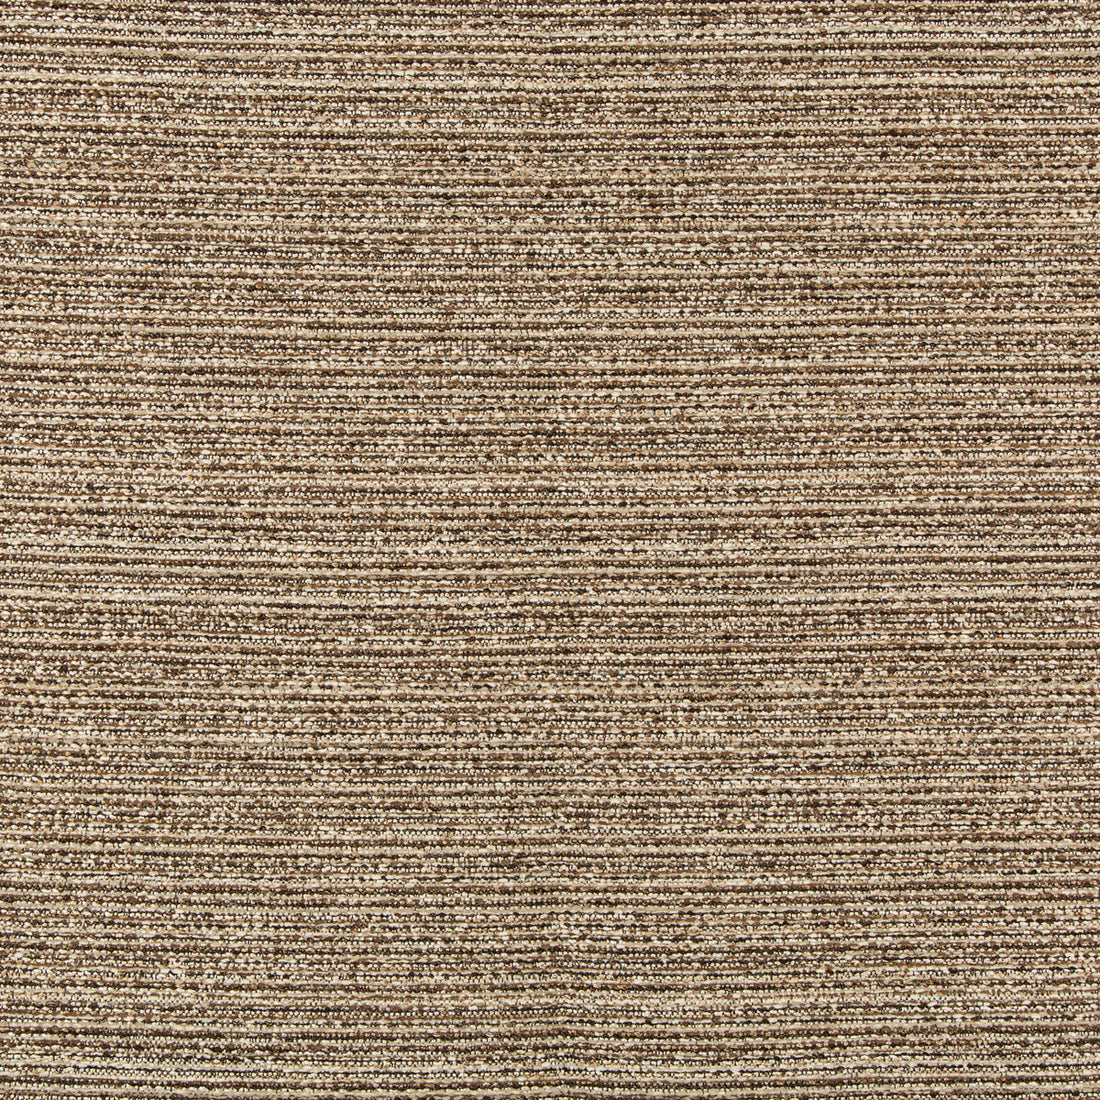 Kravet Design fabric in 36079-61 color - pattern 36079.61.0 - by Kravet Design in the Inside Out Performance Fabrics collection